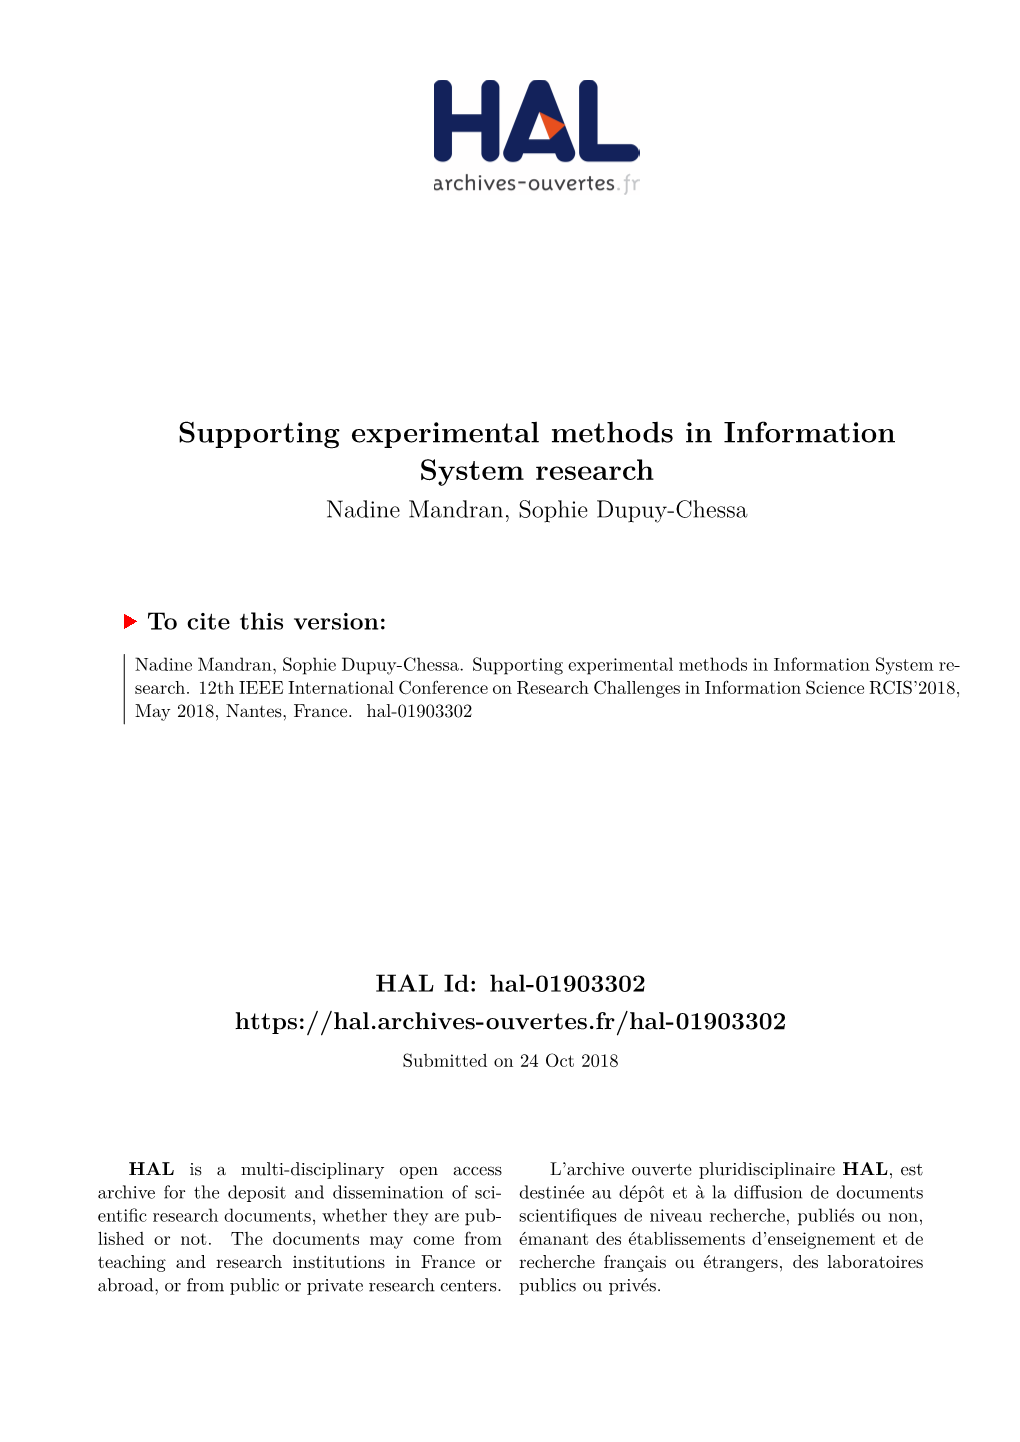 Supporting Experimental Methods in Information System Research Nadine Mandran, Sophie Dupuy-Chessa